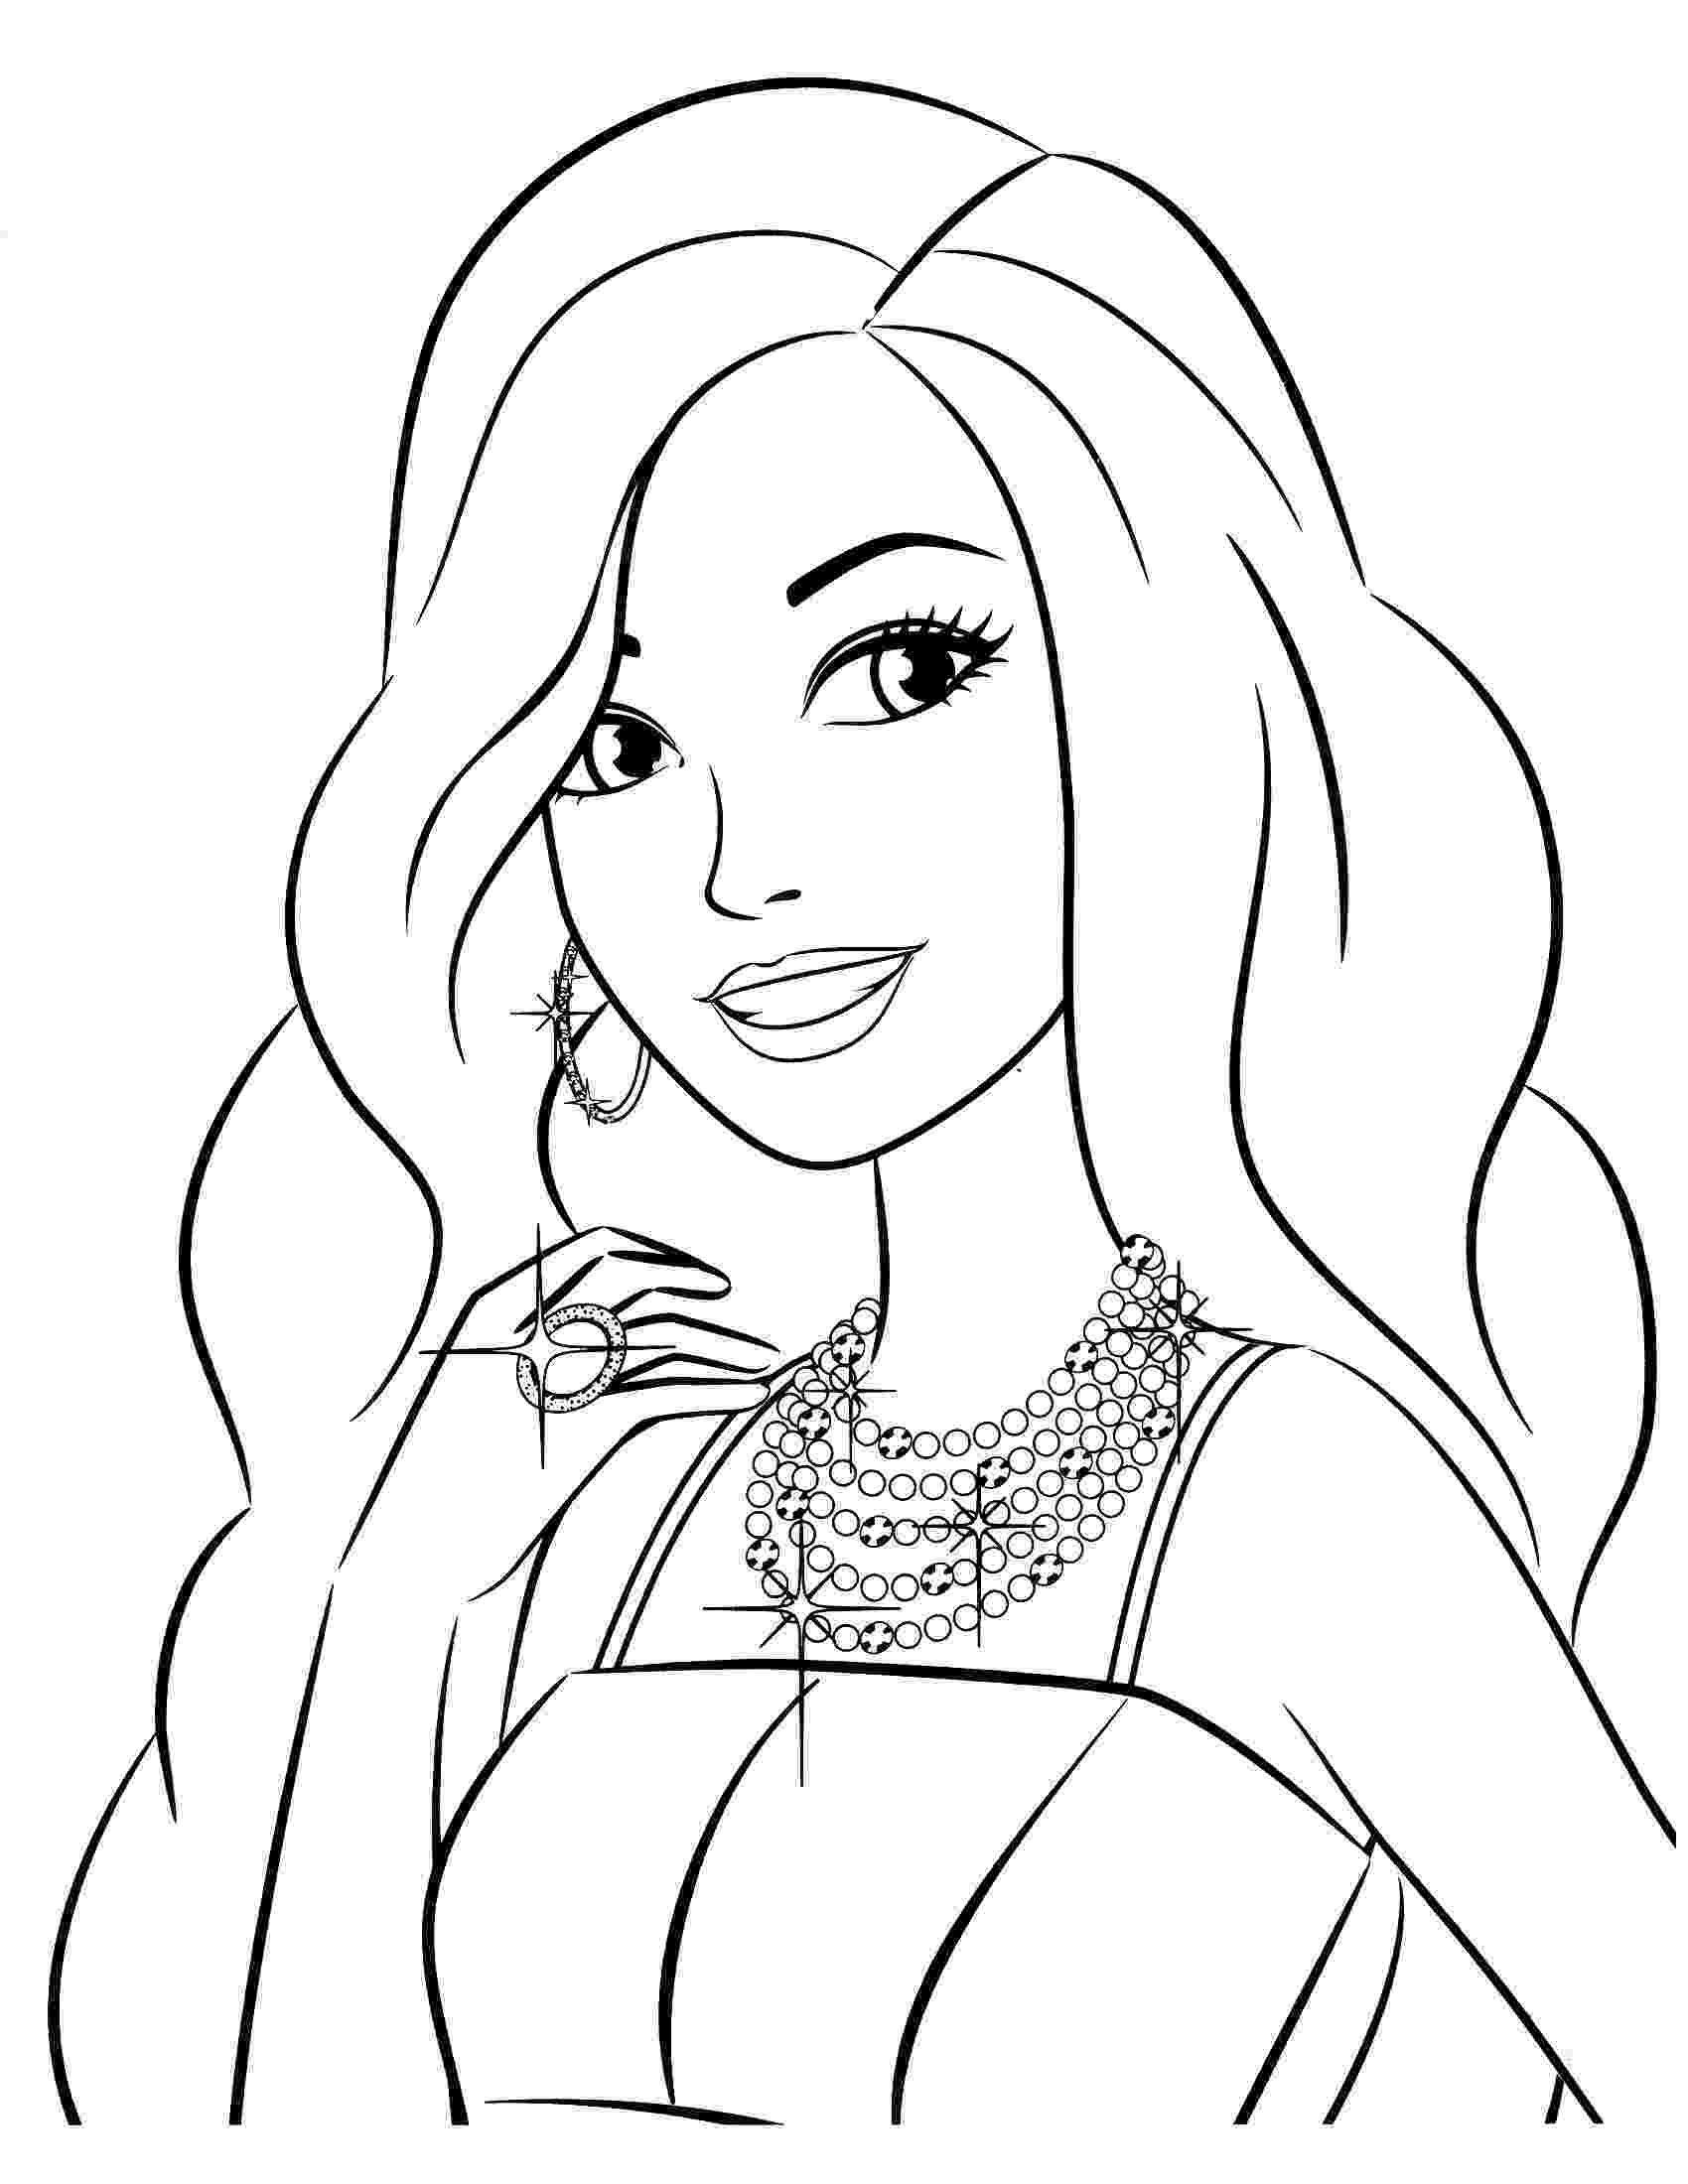 barbie girl colouring pictures barbie coloring page colour me badd pinterest barbie girl barbie pictures colouring 